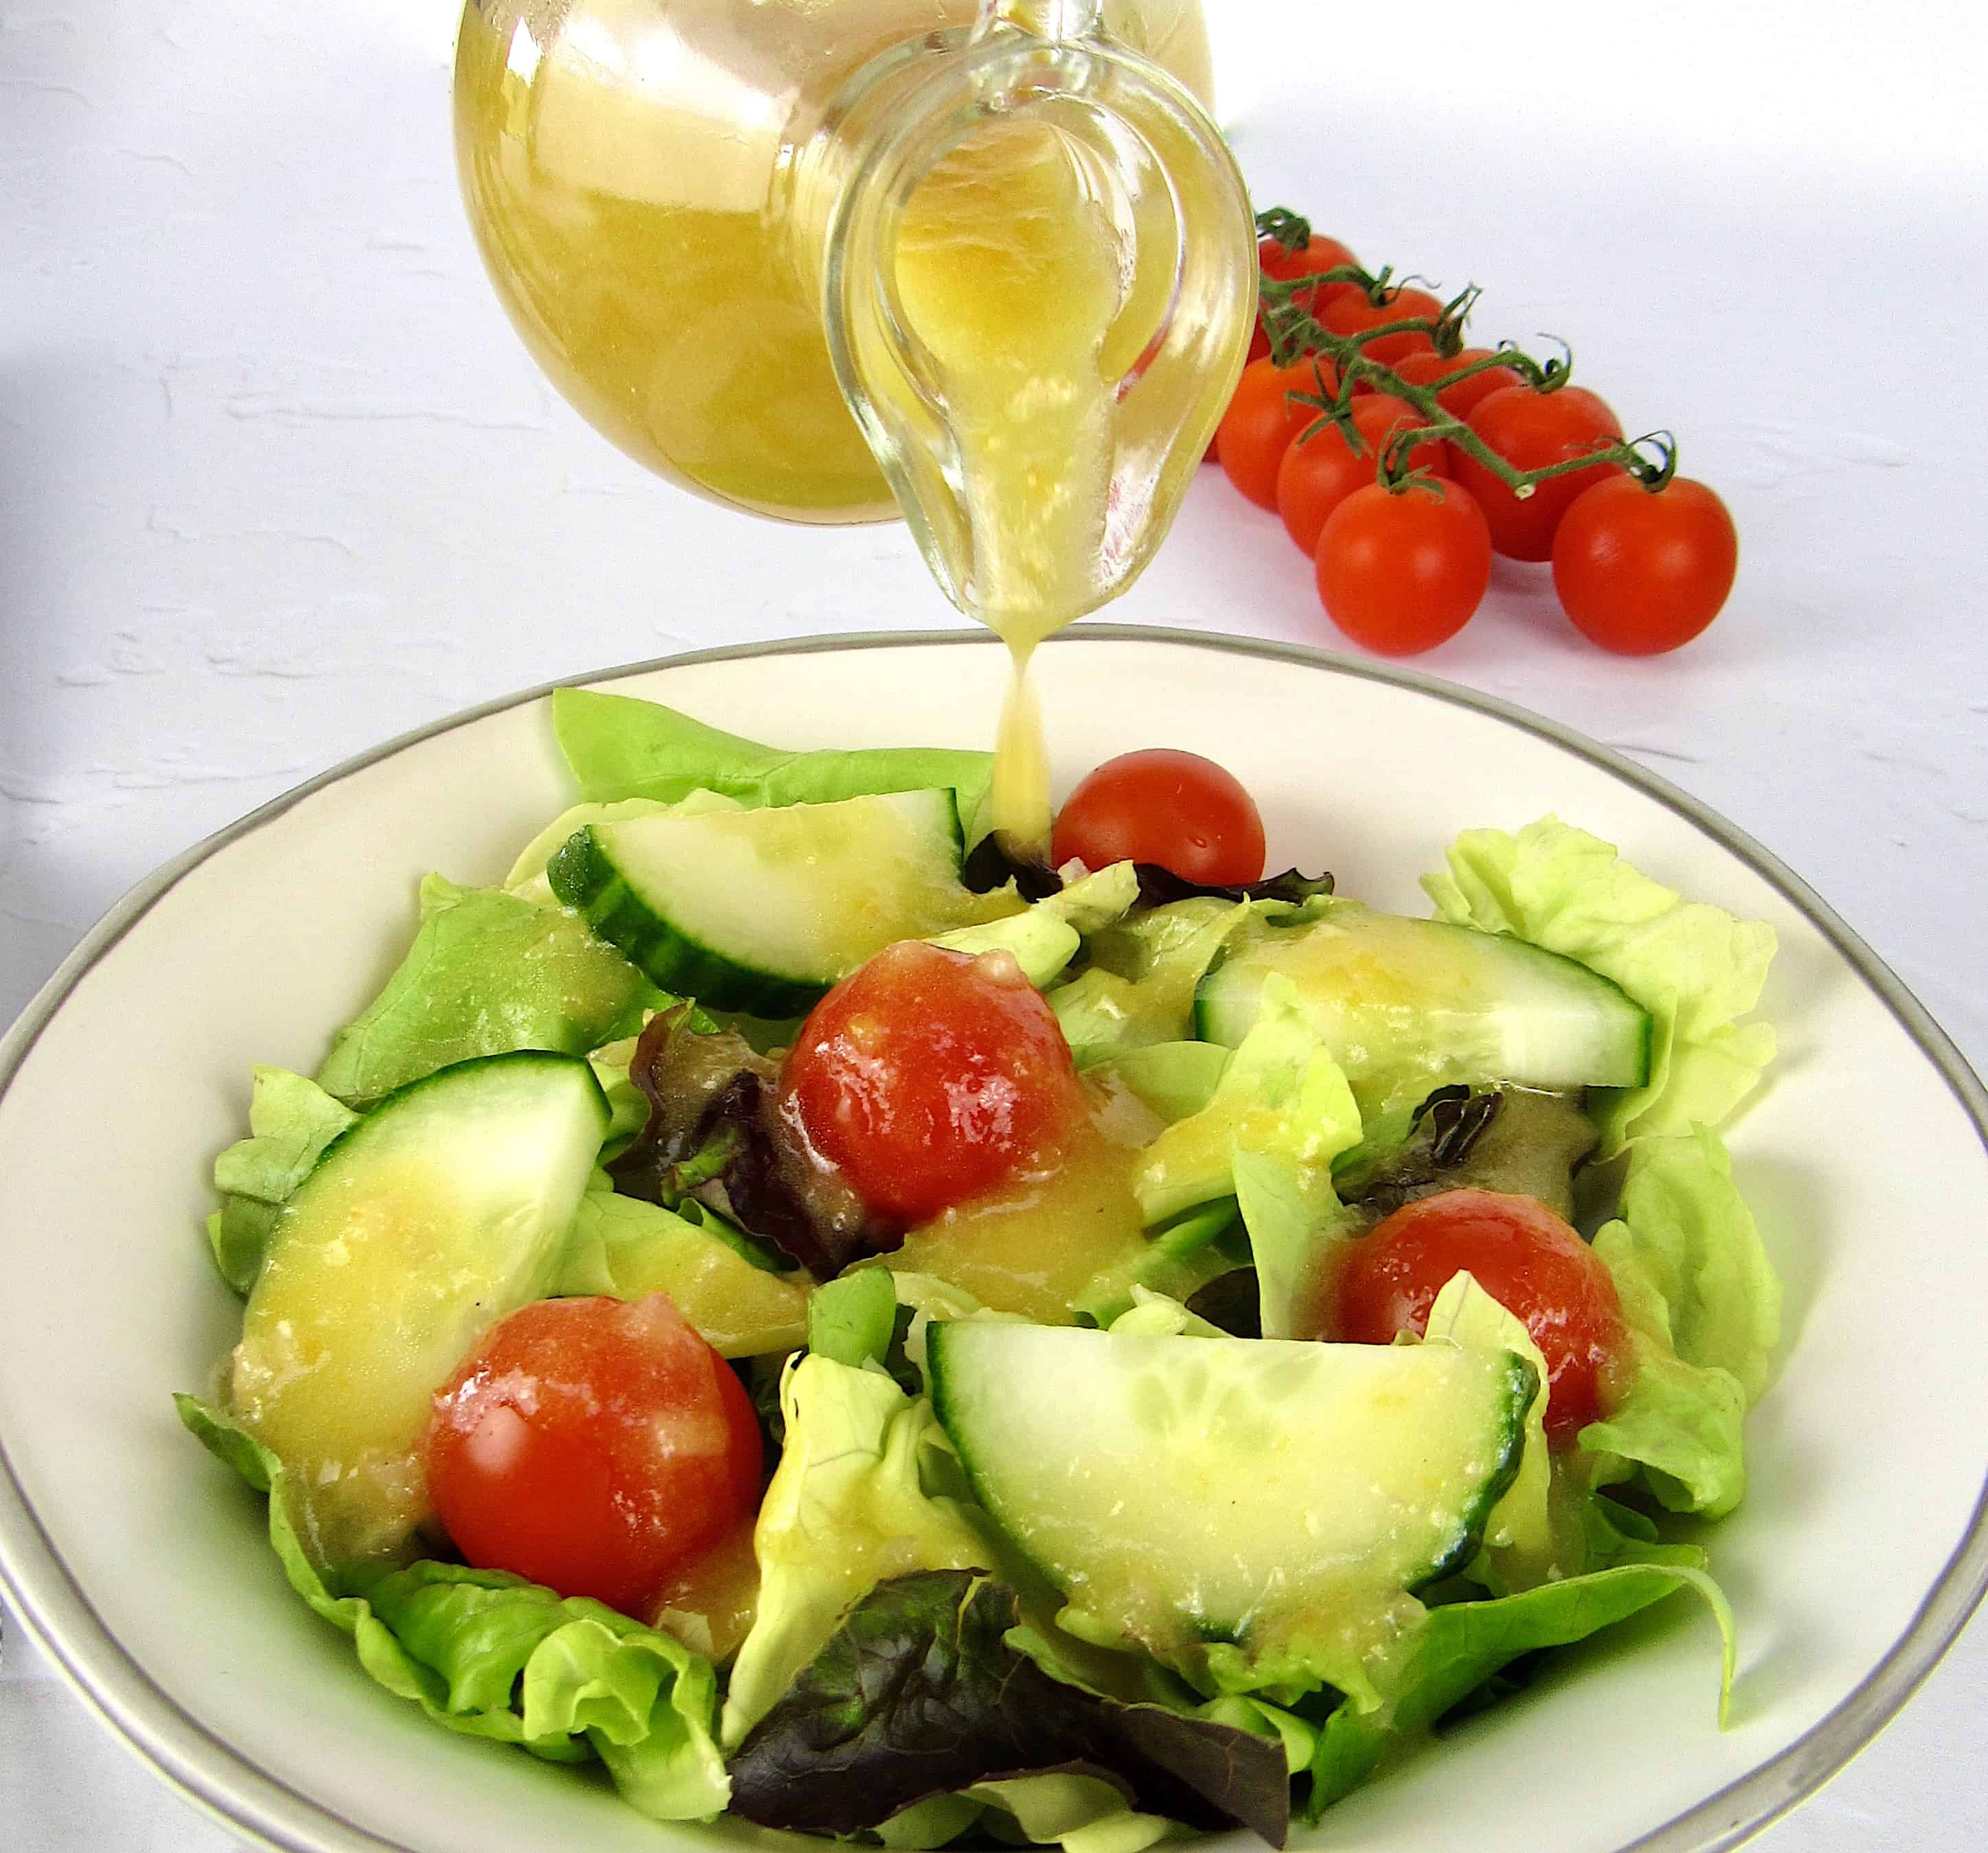 salad with apricot dressing being poured on top